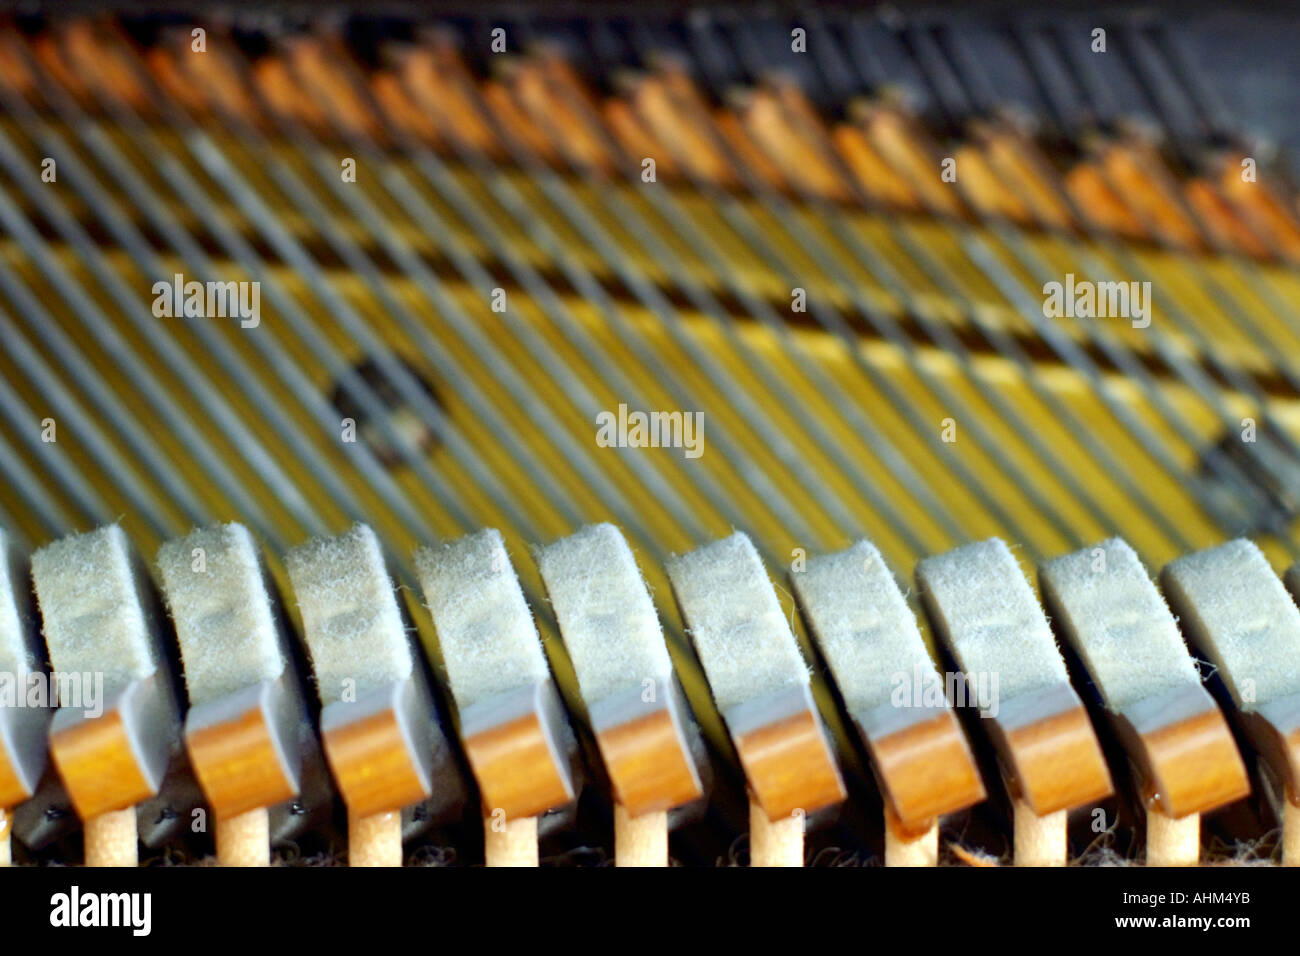 Felt-covered mallets inside a piano's soundbox, with steel strings and soundboard in the background Stock Photo